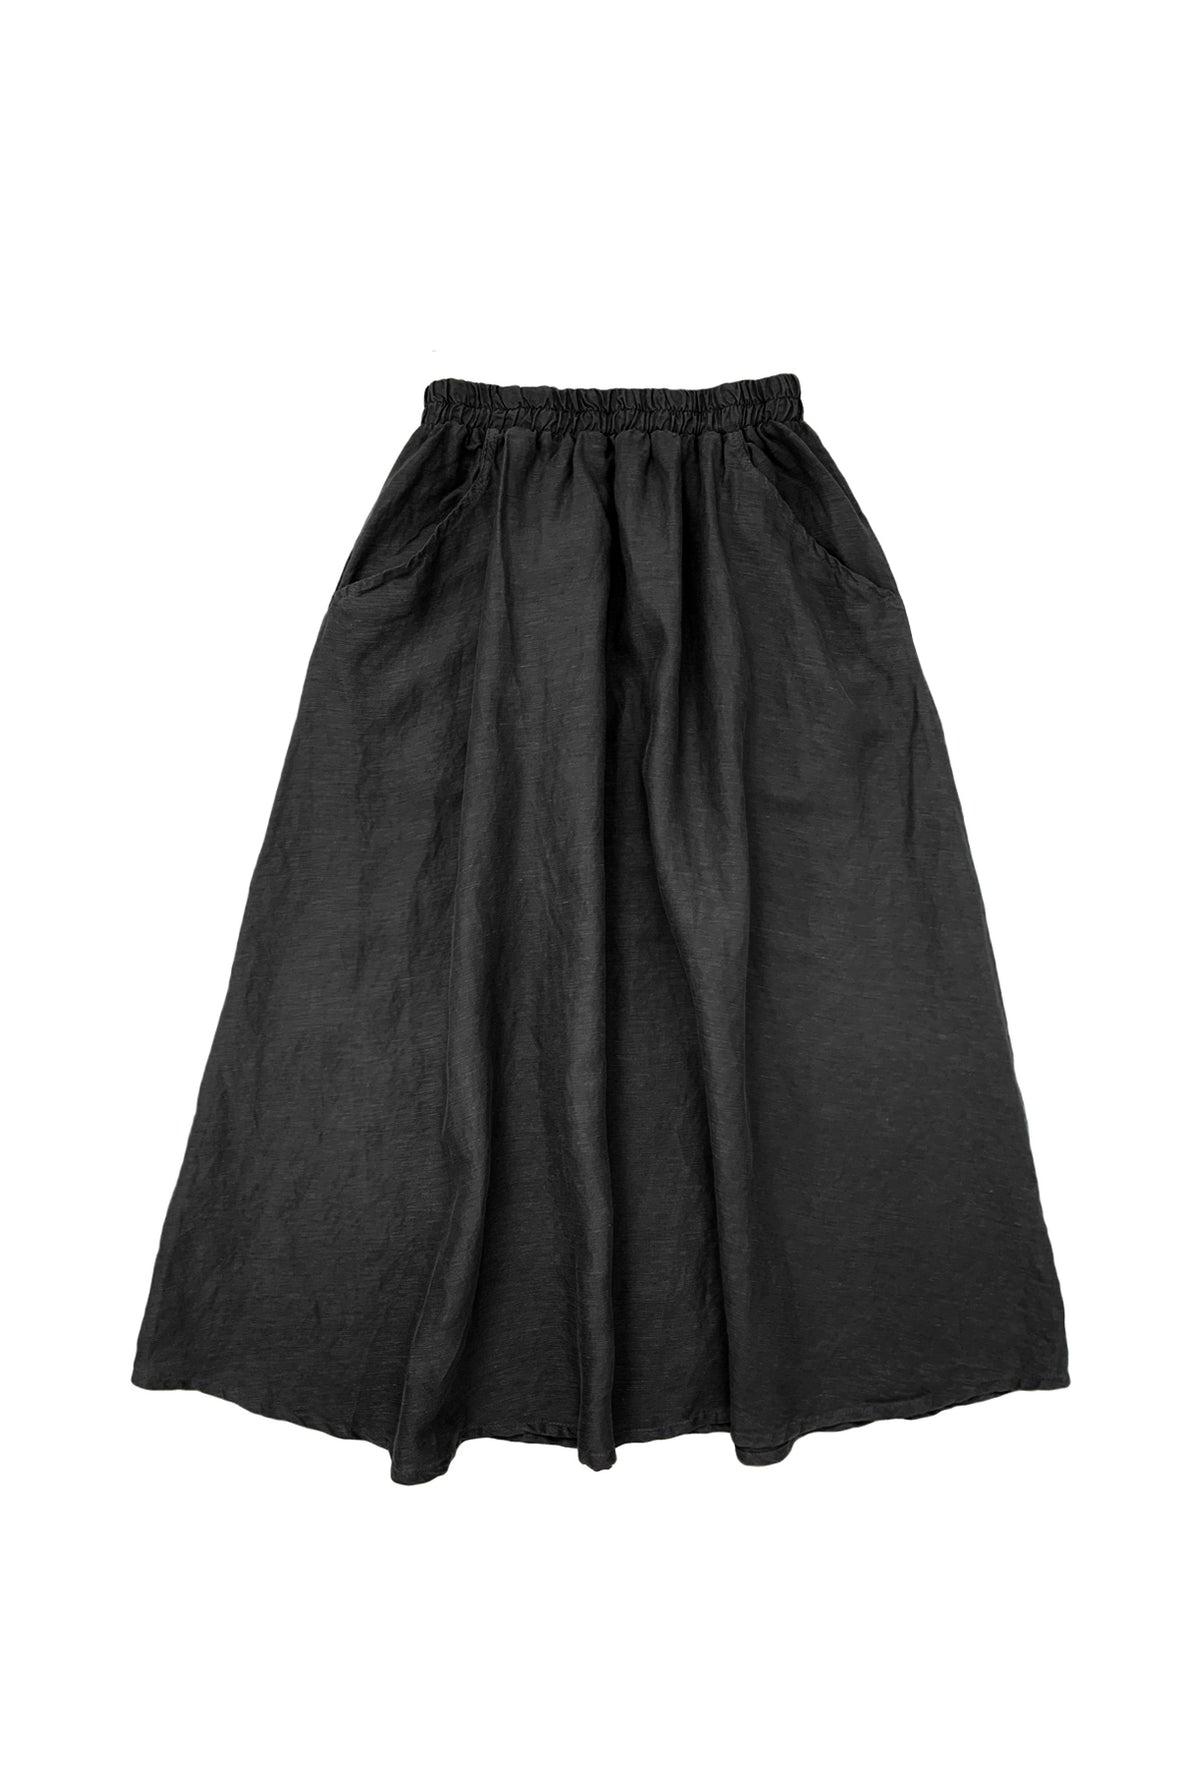 The Fawn Skirt | Curator SF | Responsibly Made Clothing